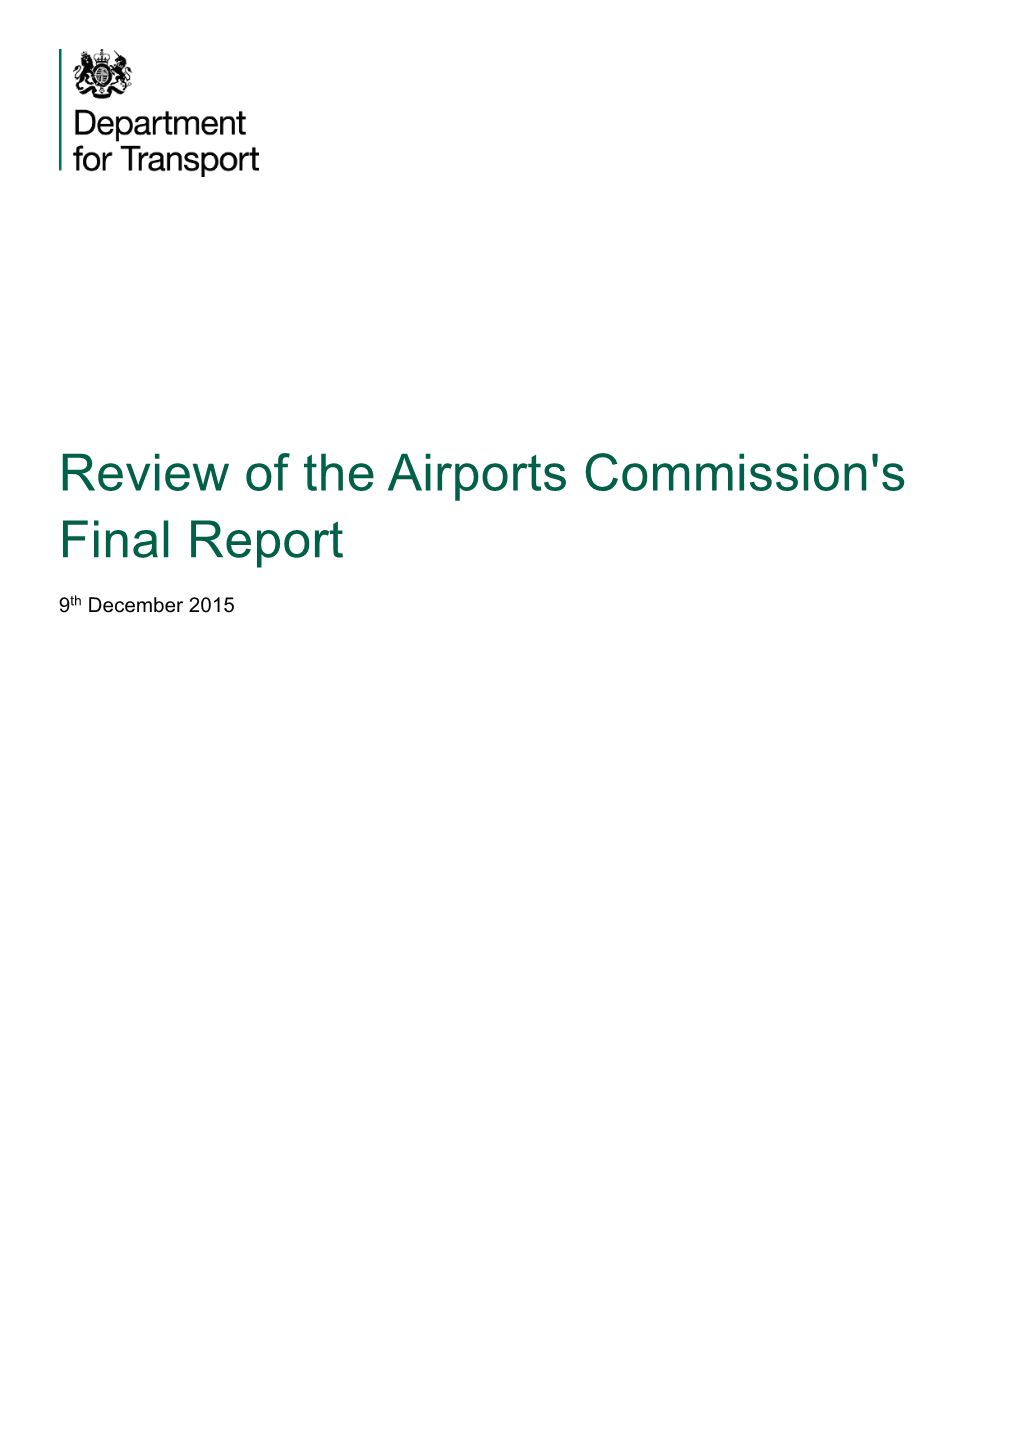 Review of the Airports Commission's Final Report